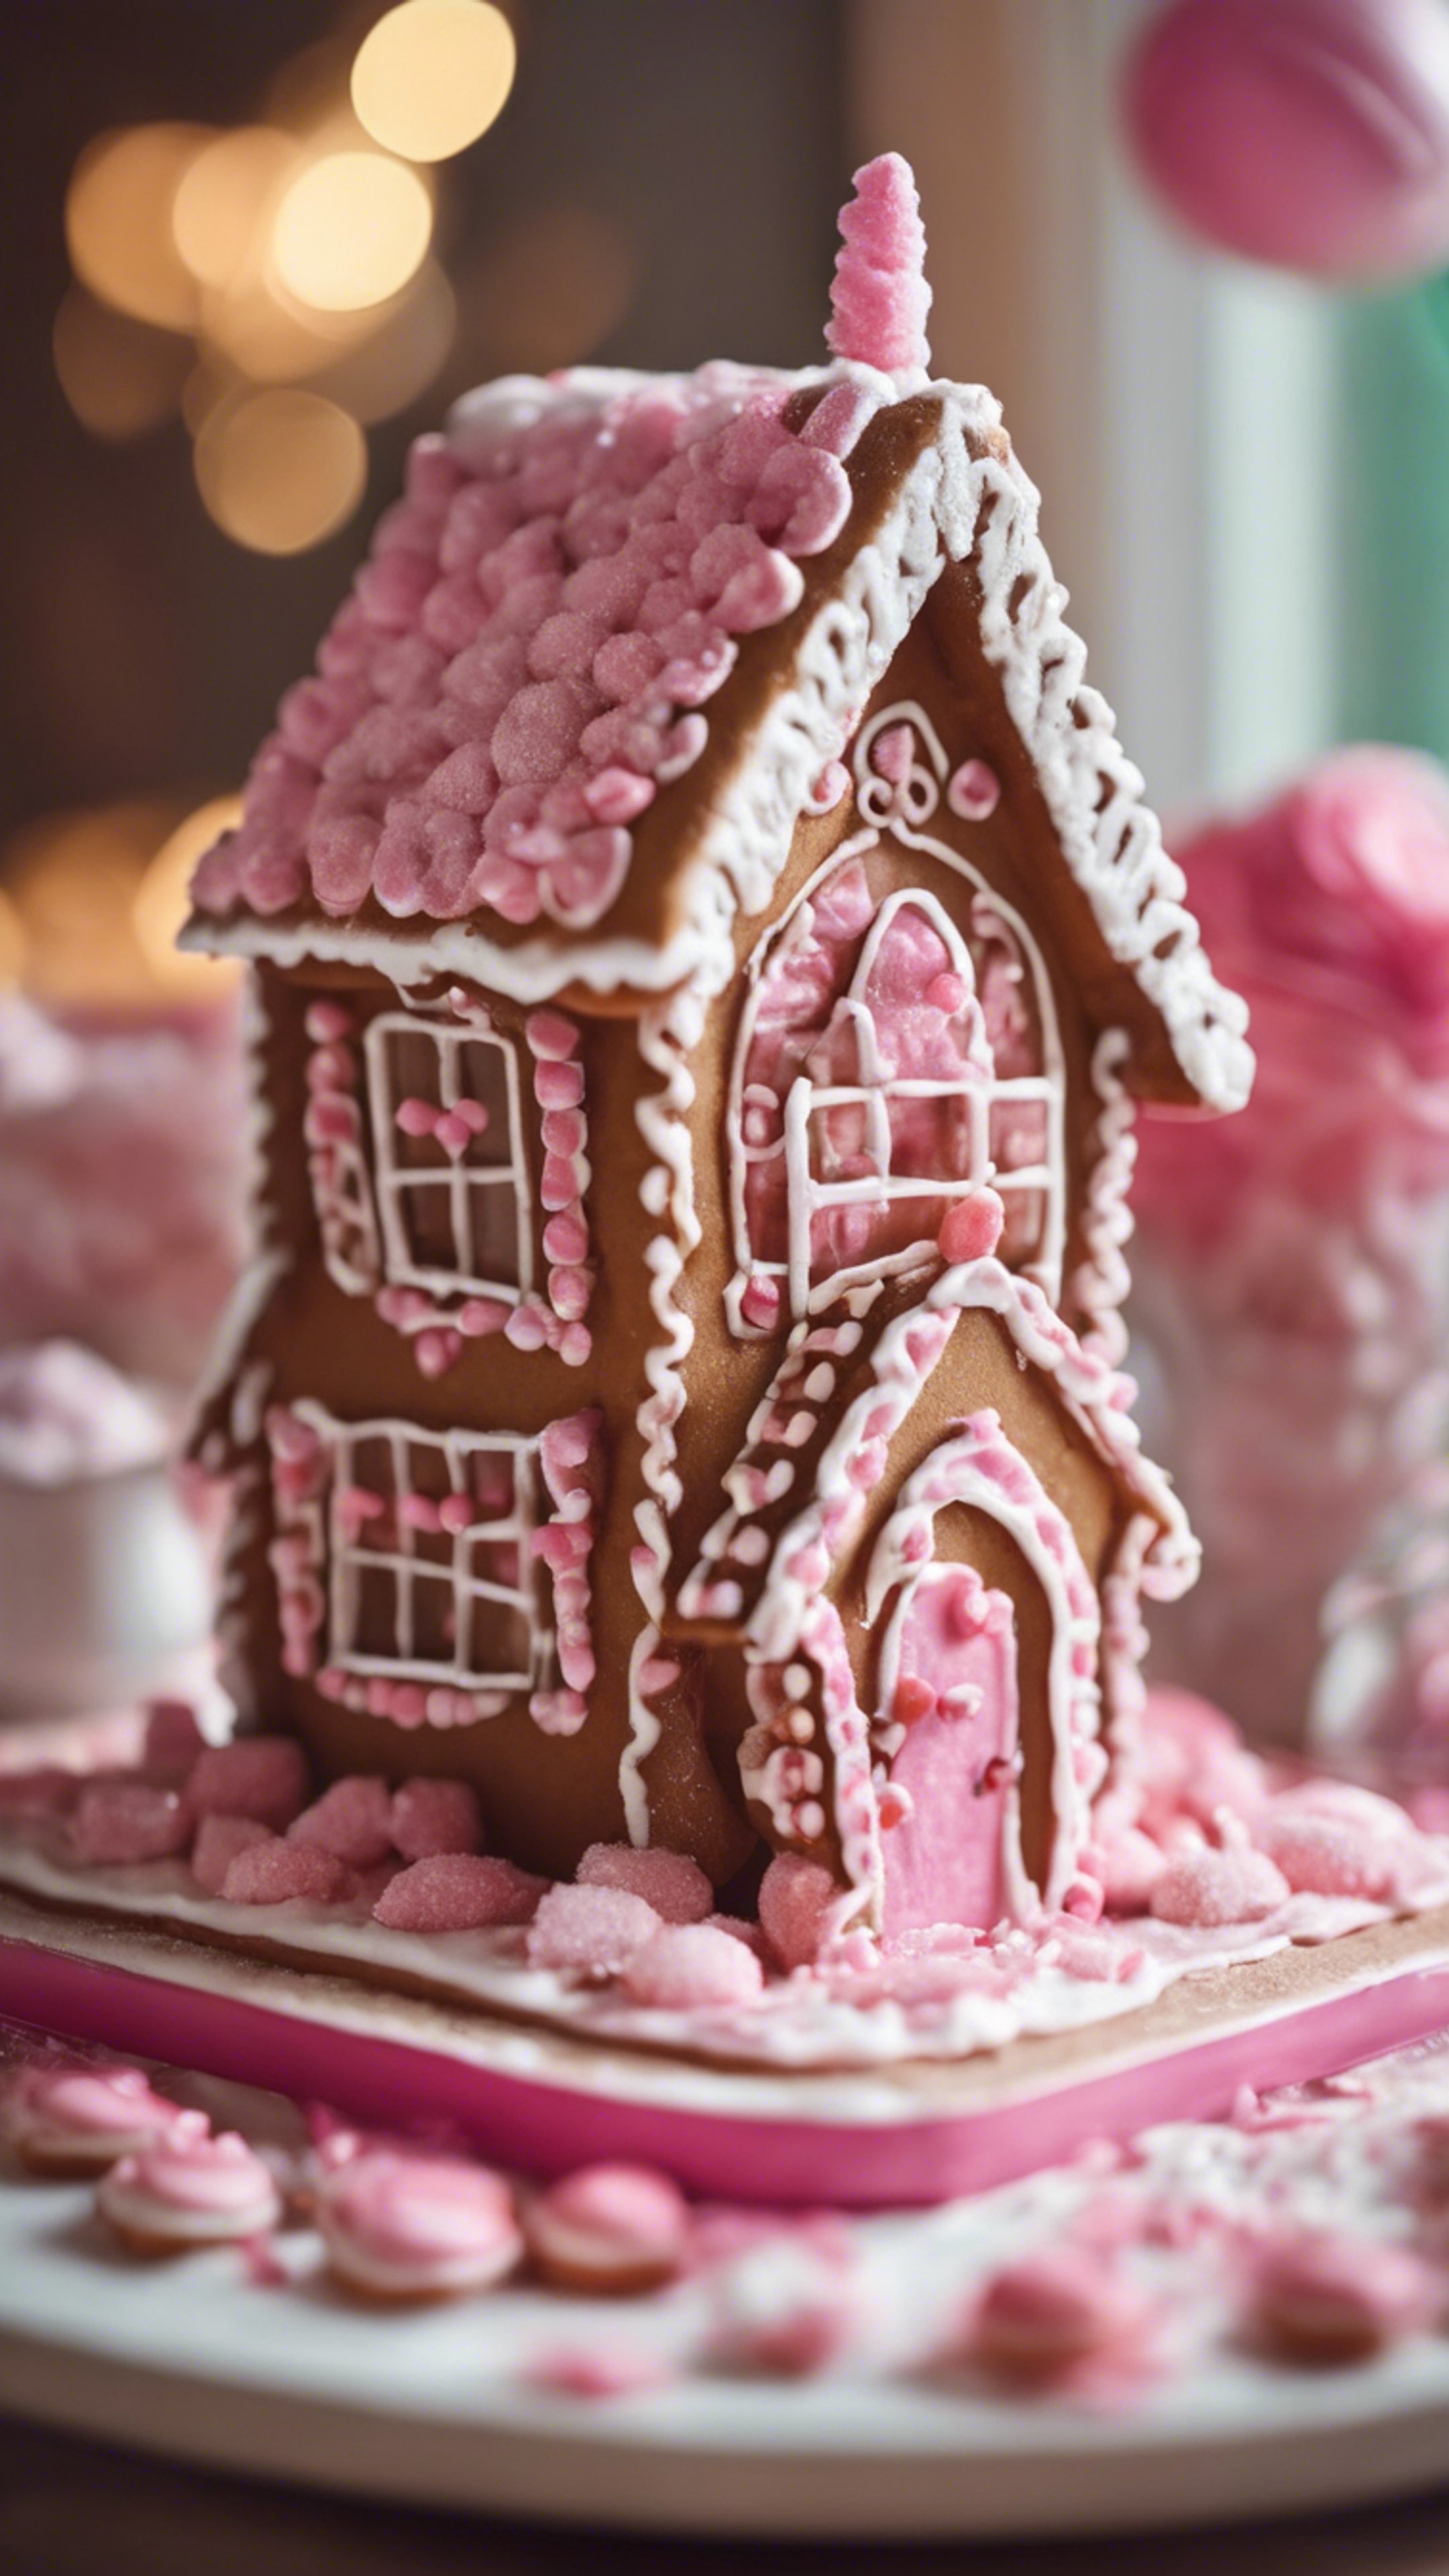 A cute gingerbread house adorned with pink icing and candy. Kertas dinding[80166f7992434f38b590]